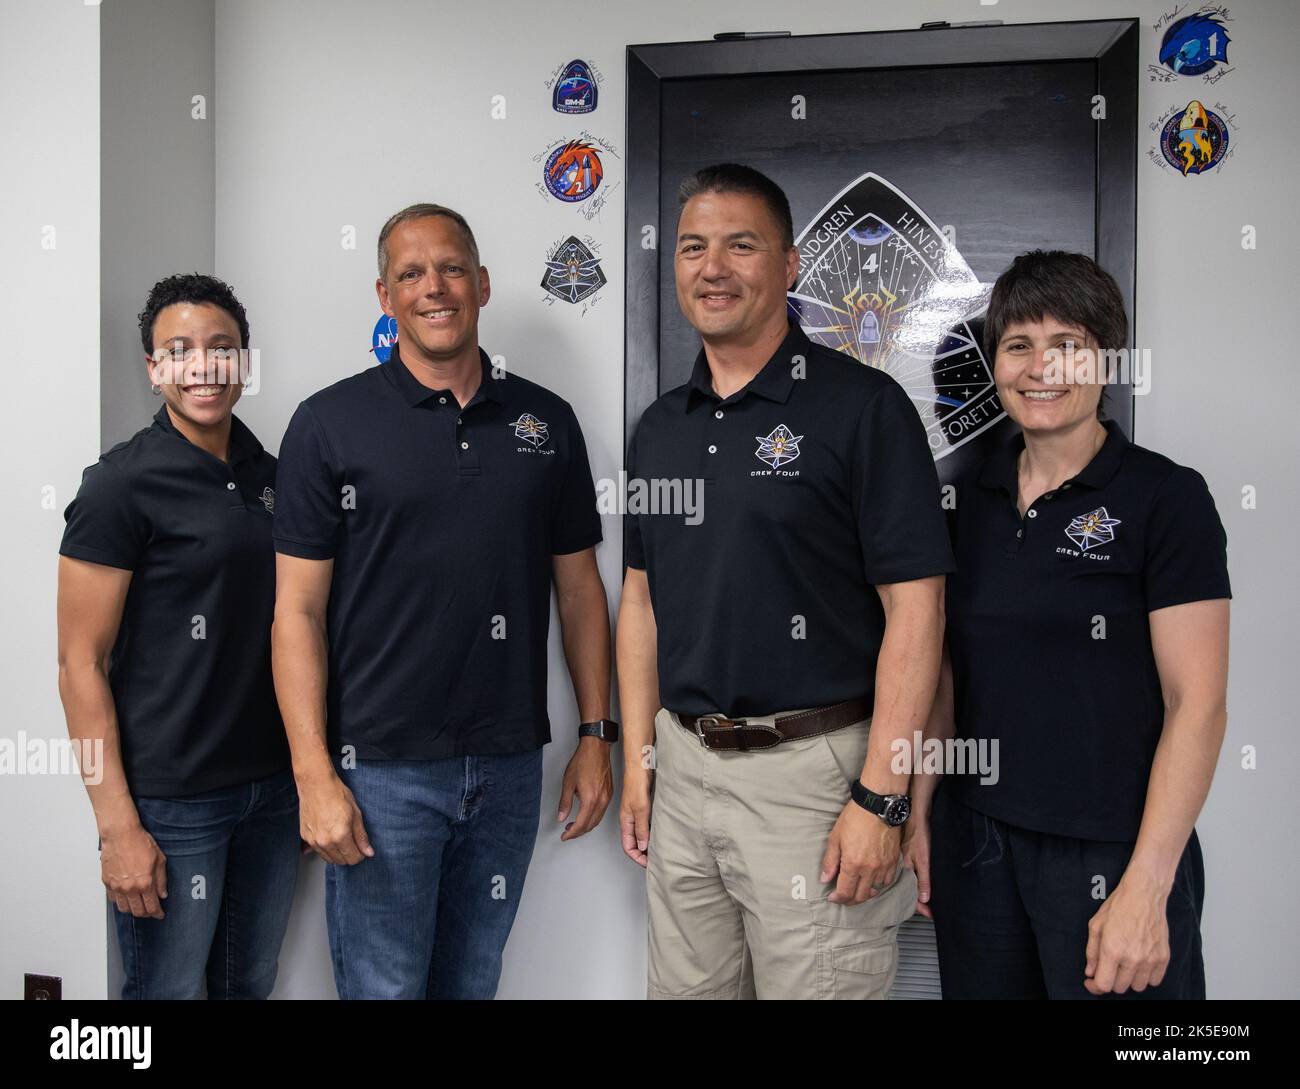 From left, Crew-4 mission astronauts Jessica Watkins, Bob Hines, Kjell Lindgren, and Samantha Cristoforetti, pose in the Astronaut Crew Quarters inside Kennedy Space Center’s Neil A. Armstrong Operations and Checkout Building on April 27, 2022. The four astronauts will launch aboard SpaceX’s Crew Dragon – powered by the company’s Falcon 9 rocket – to the International Space Station as part of NASA’s Commercial Crew Program. They are scheduled to lift off today at 3:52 a.m. EDT from Launch Complex 39A at Kennedy. Stock Photo